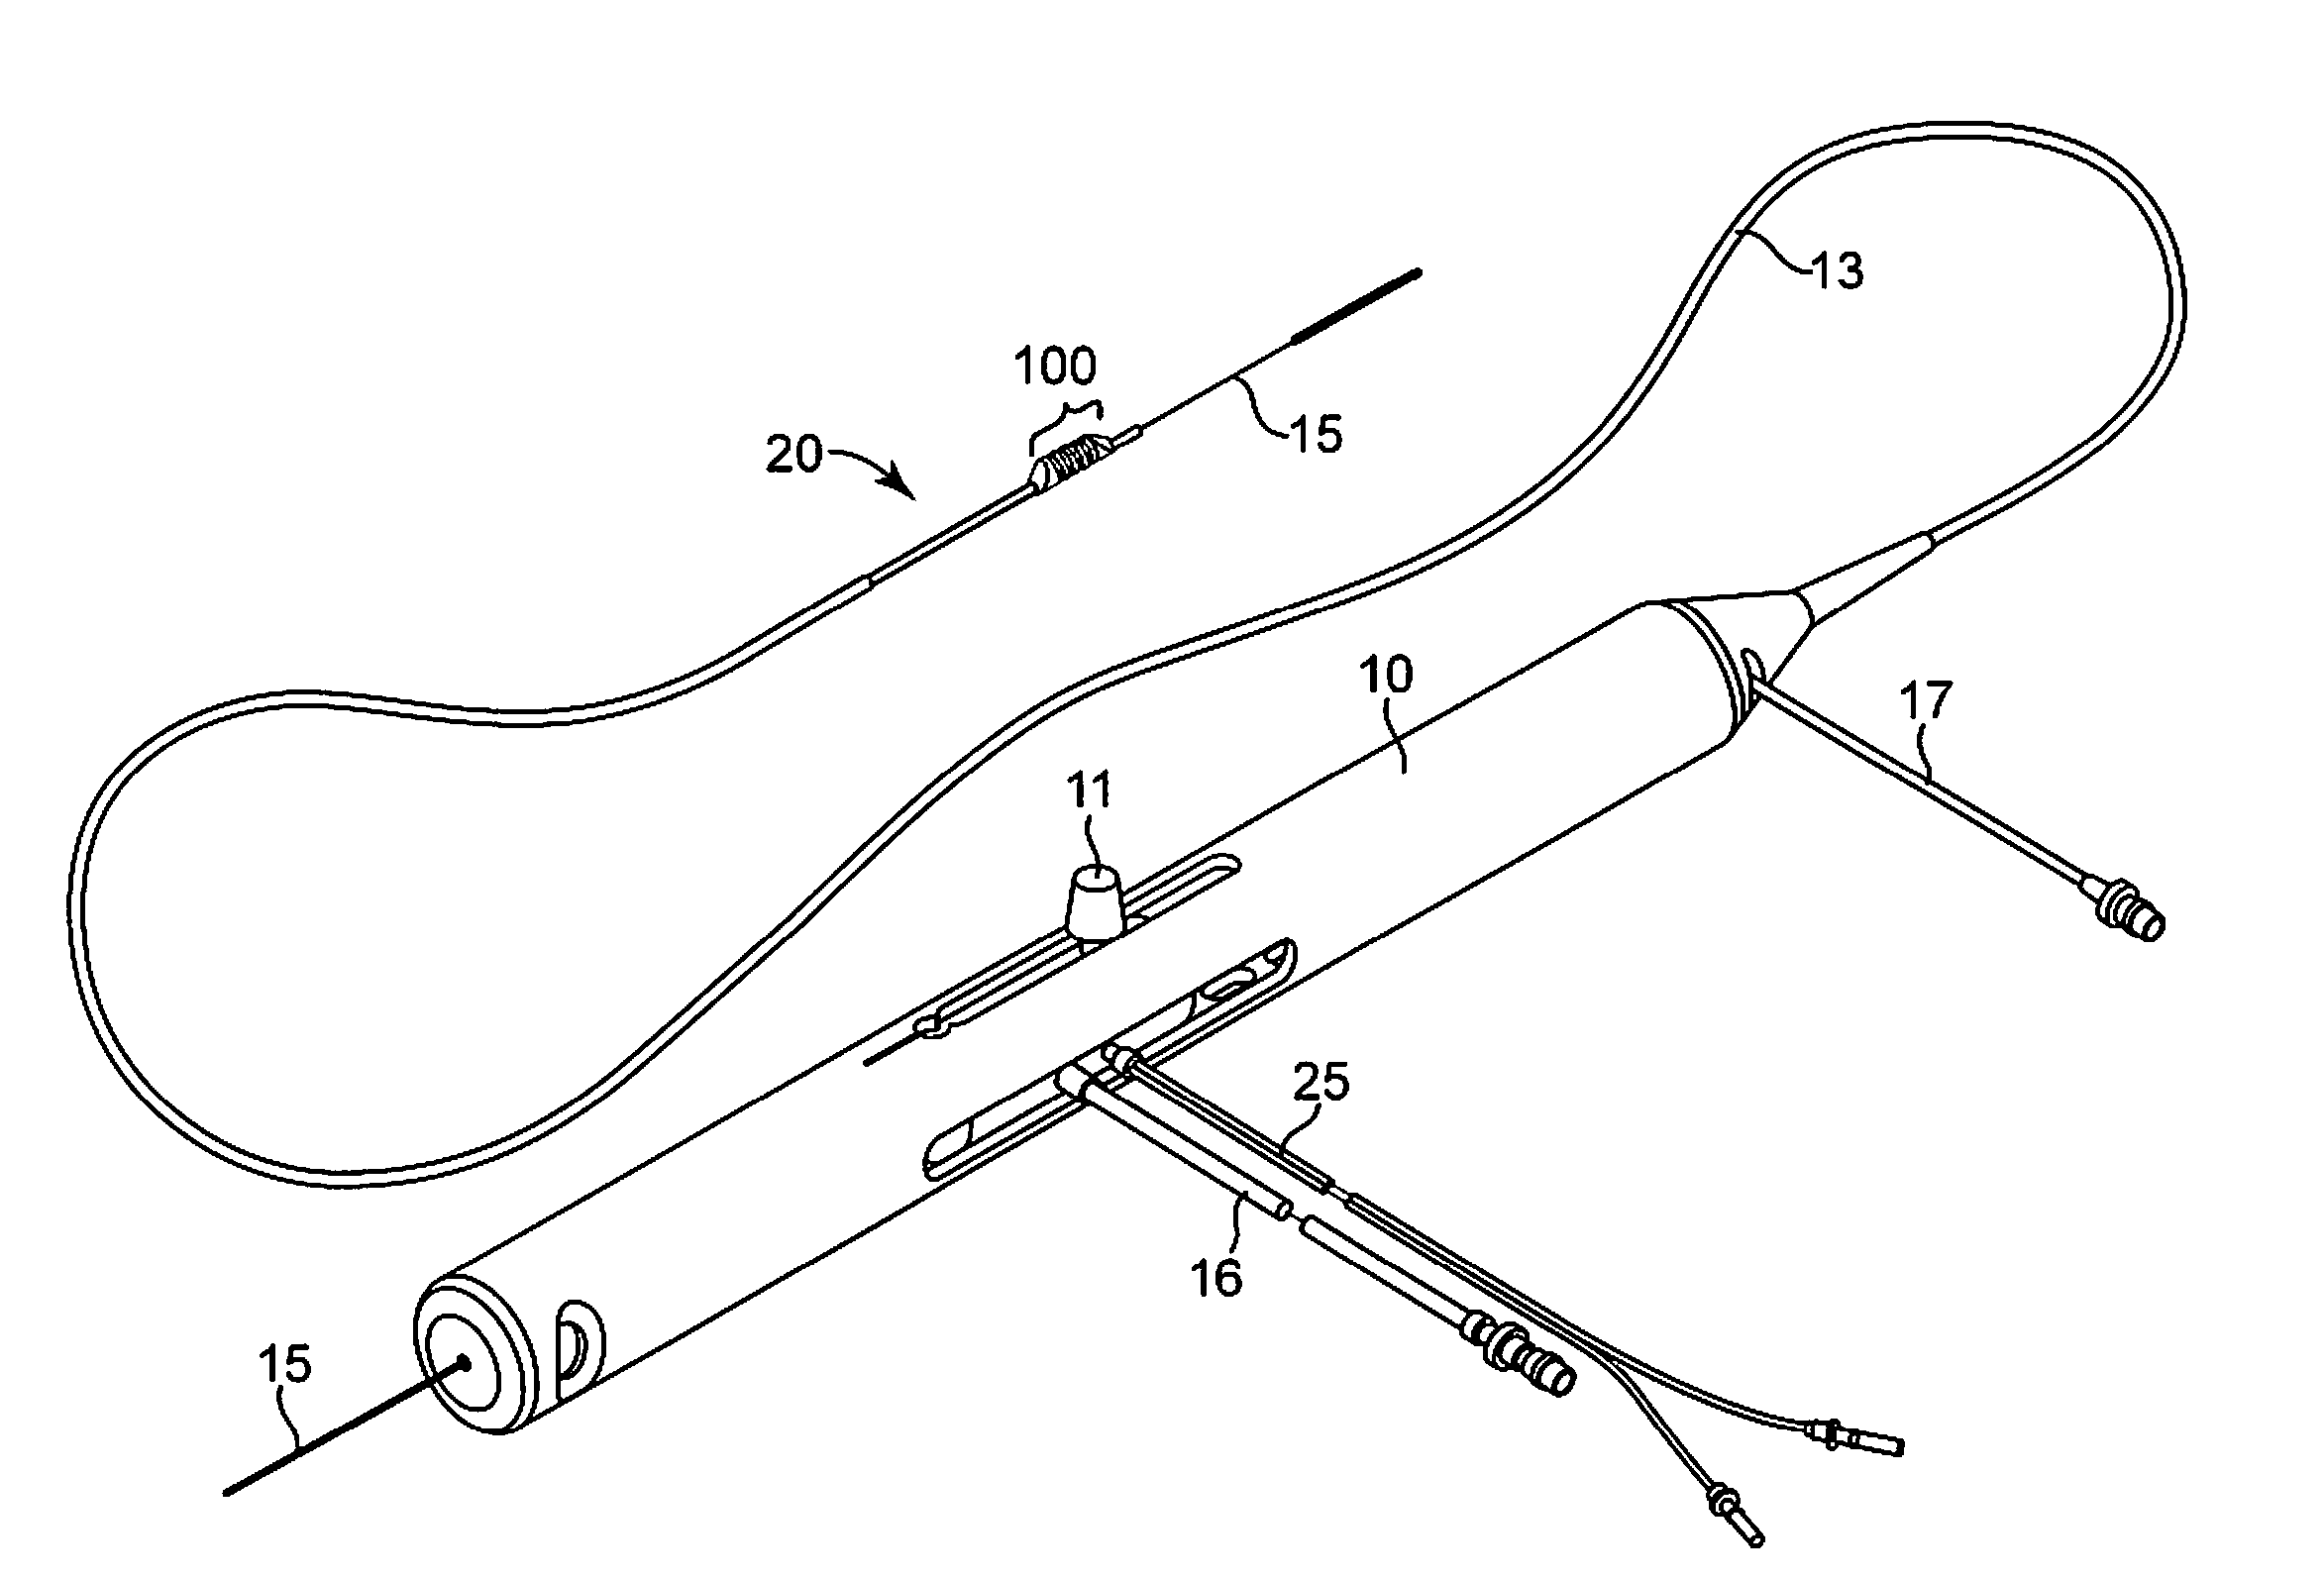 Rotational atherectomy segmented abrading head and method to improve abrading efficiency